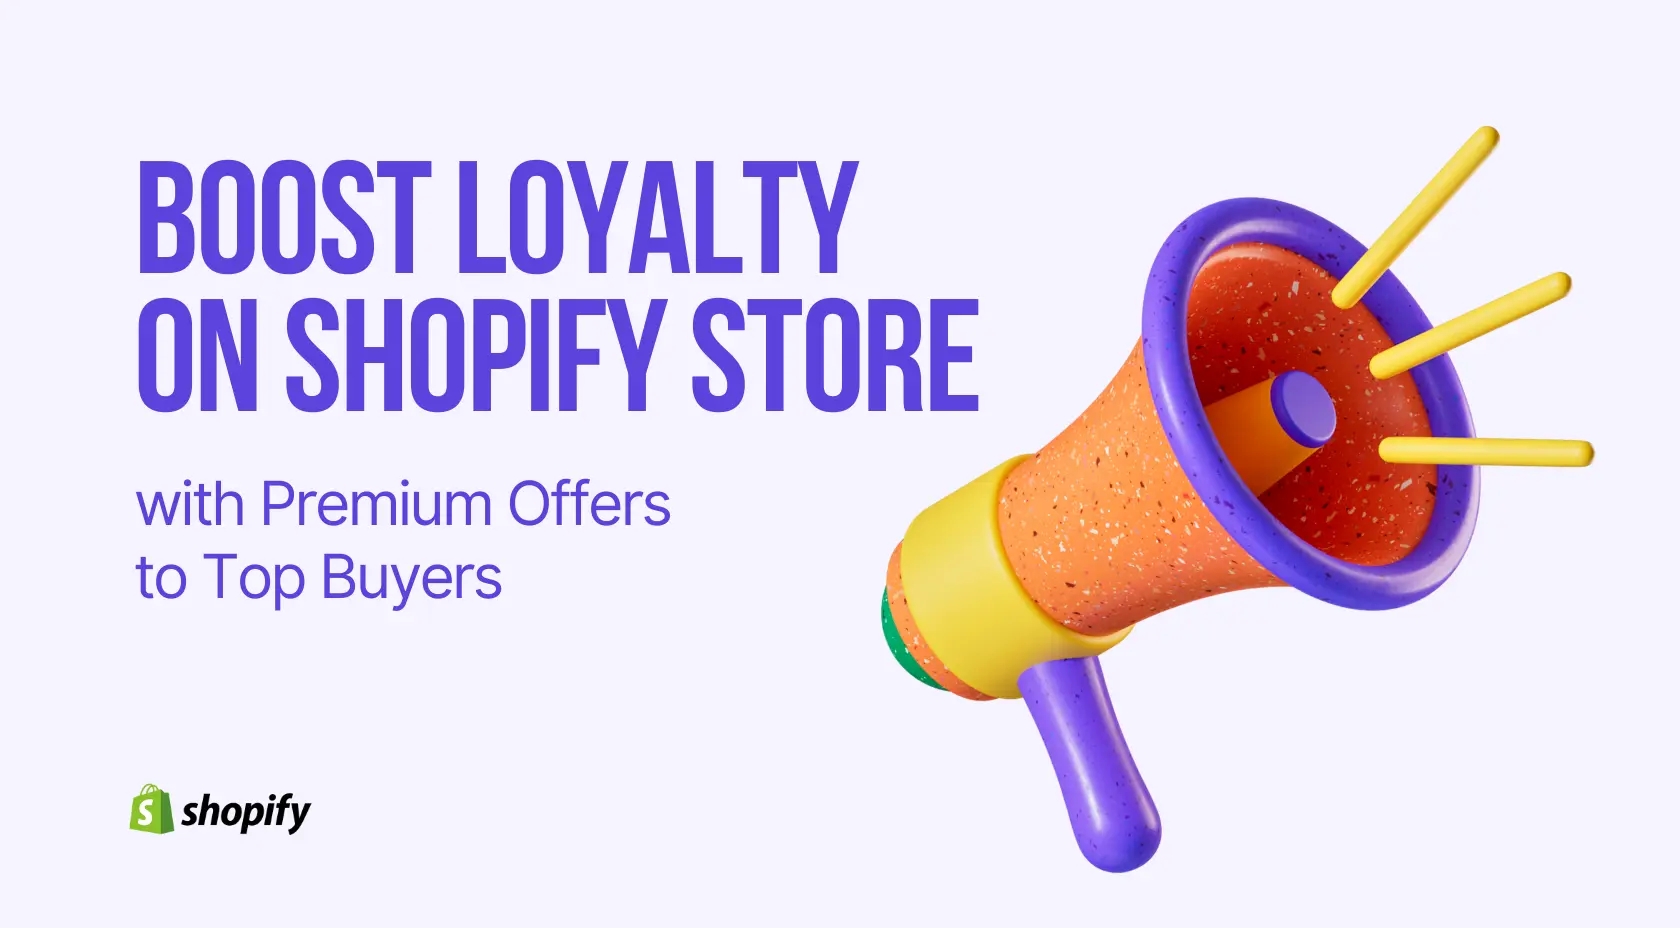 Boost Loyalty on Shopify Store with Premium Offers to Top Buyers